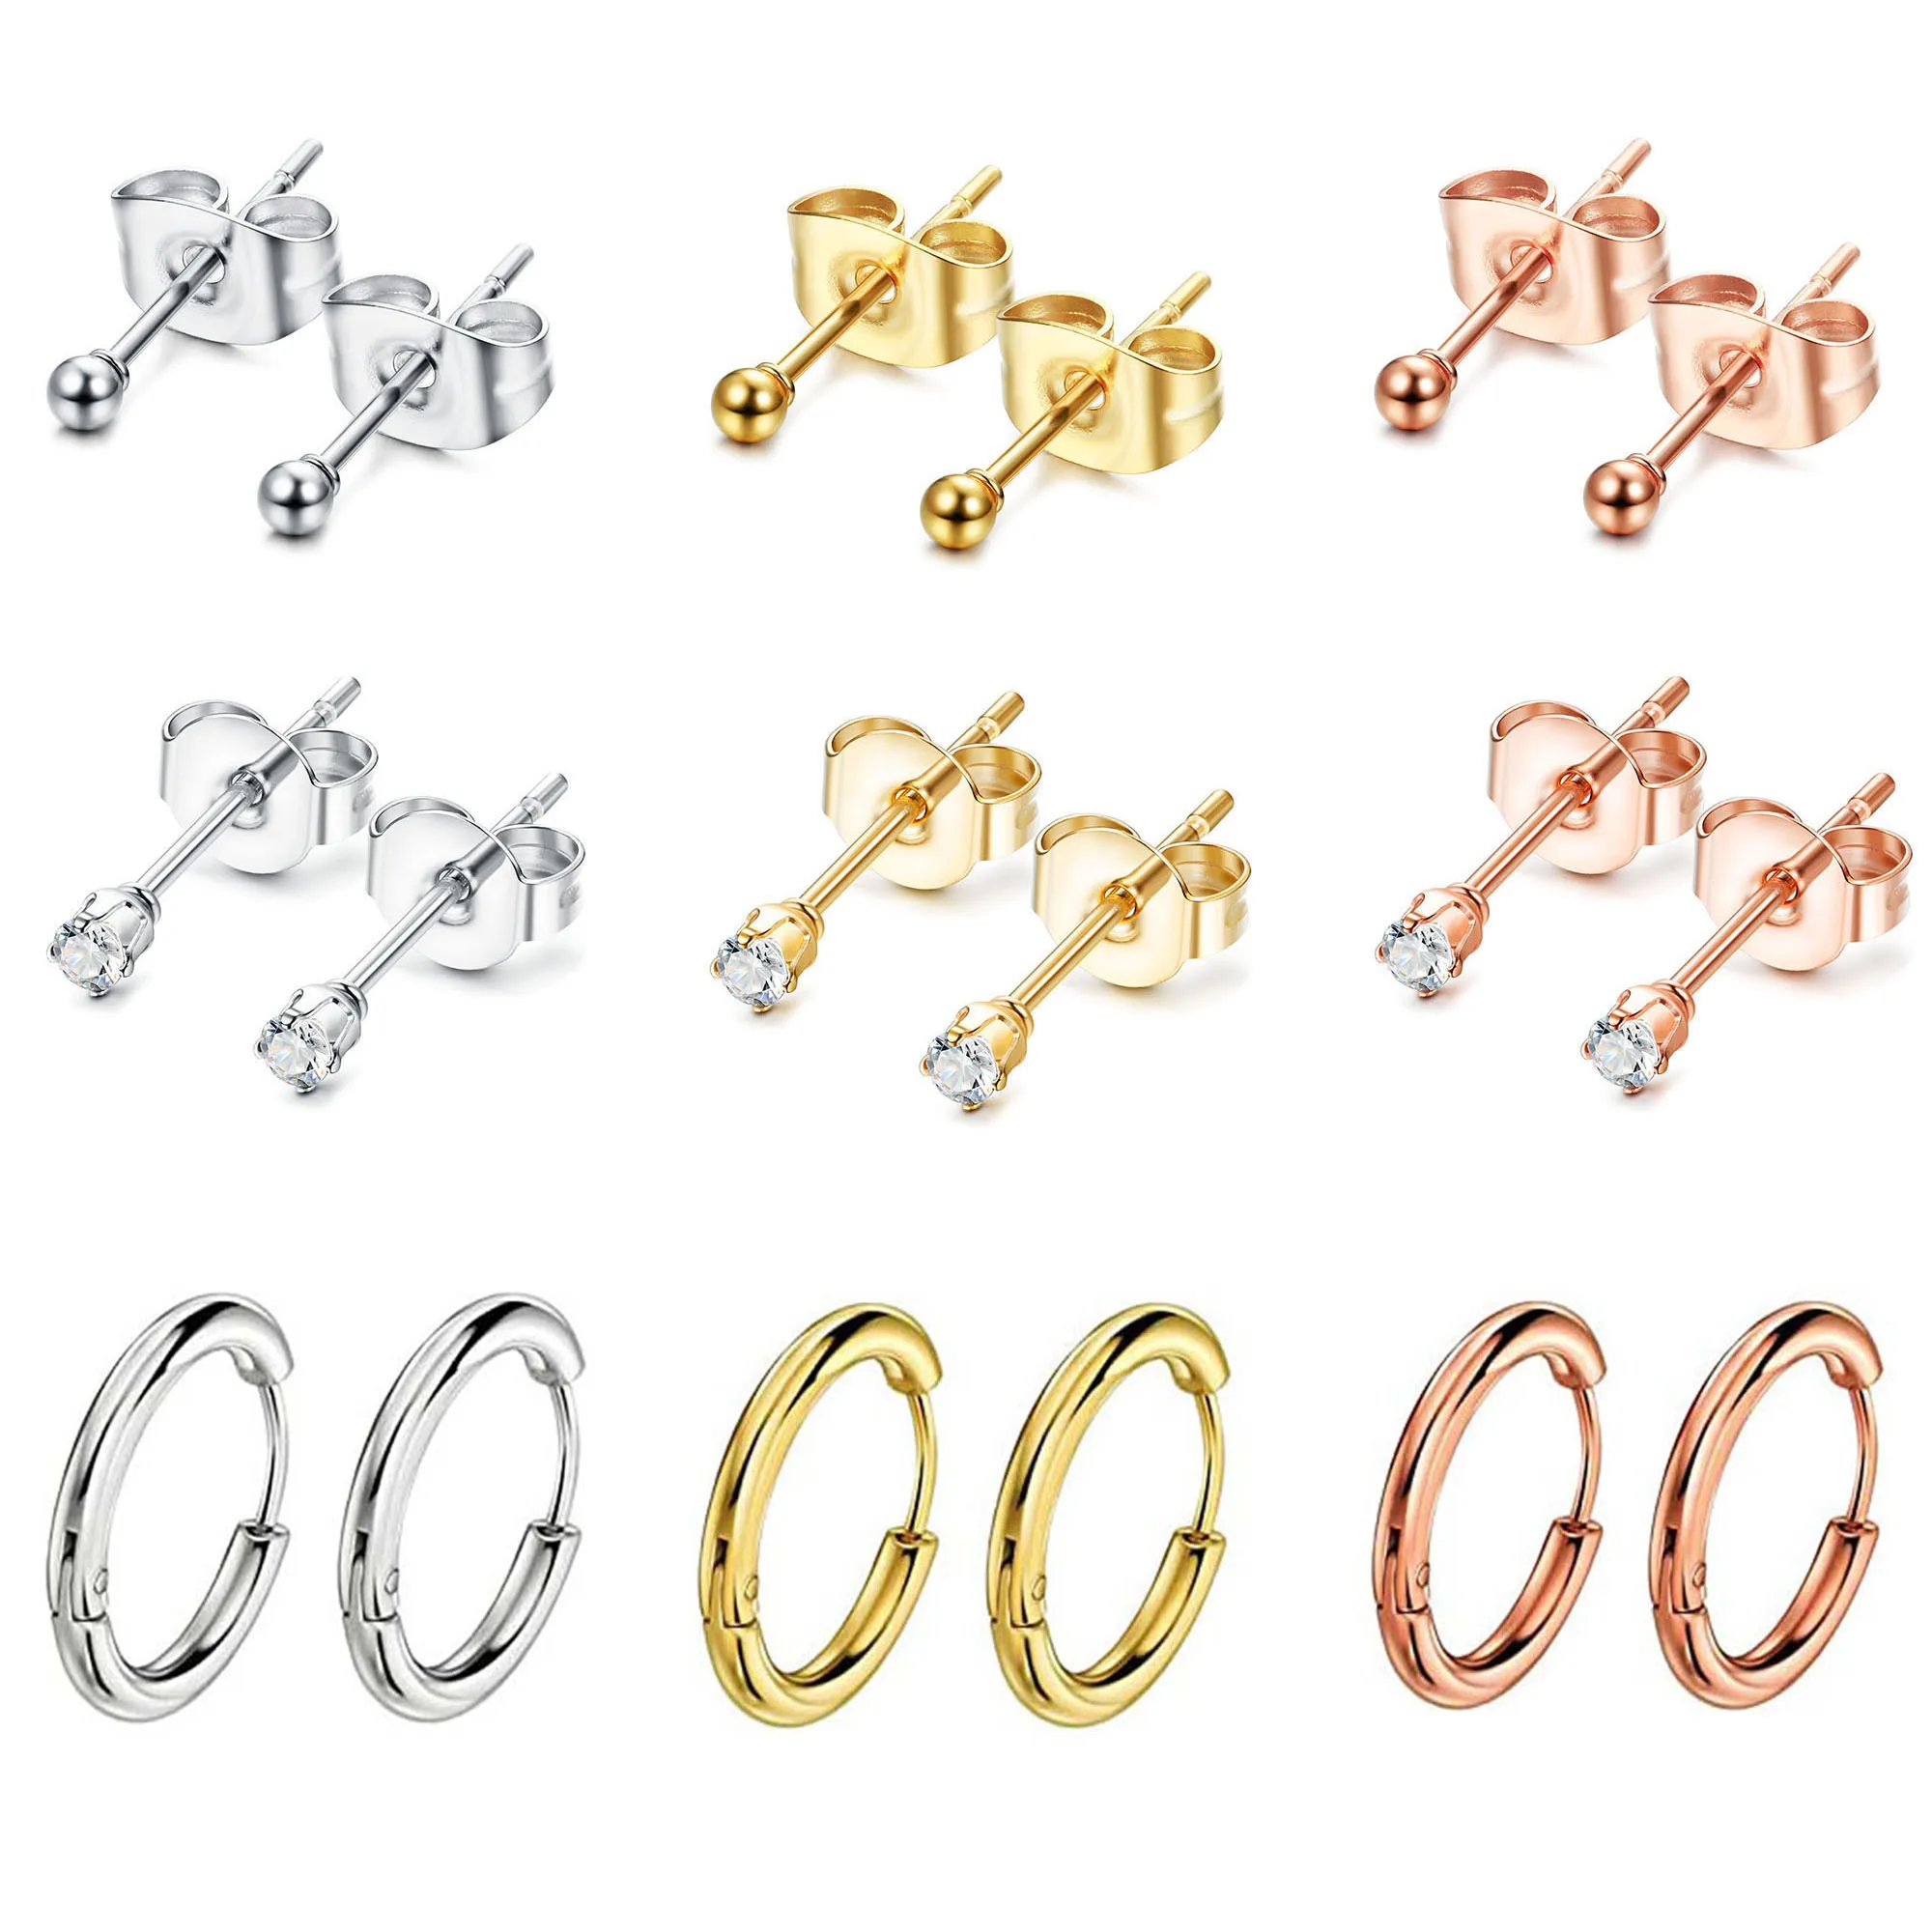 

9 Pairs Stainless Steel 2mm Tiny Stud Earrings for Women Mens Endless Hoops CZ Balls Cartilage Earrings Set Silver Gold